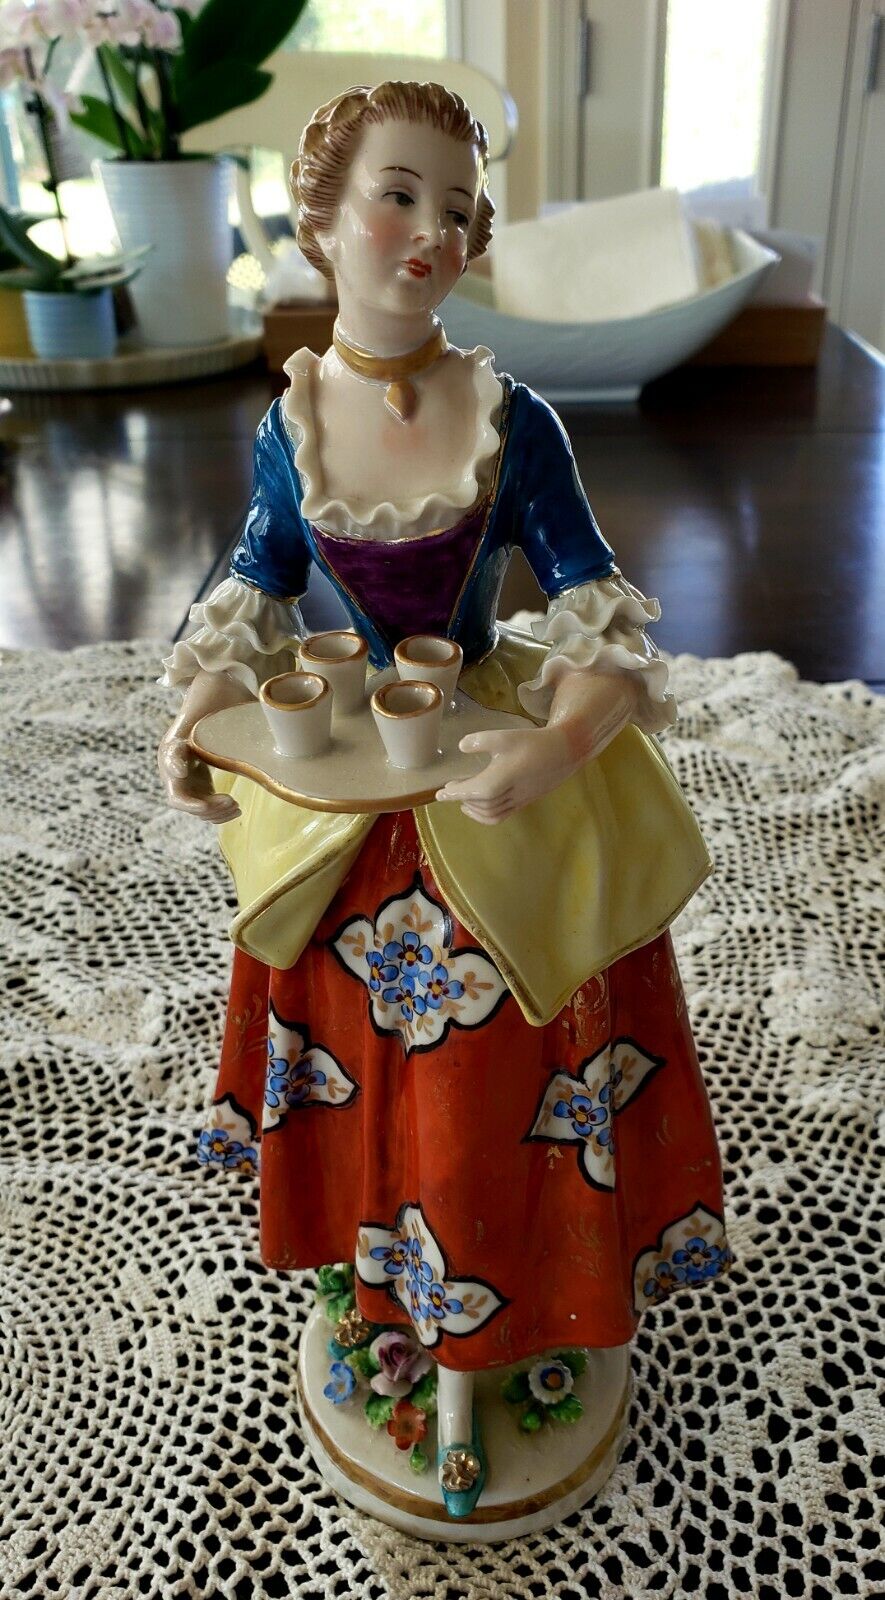 Antique German Sitzendorf Porcelain figurine - Young woman with Chocolate cups.